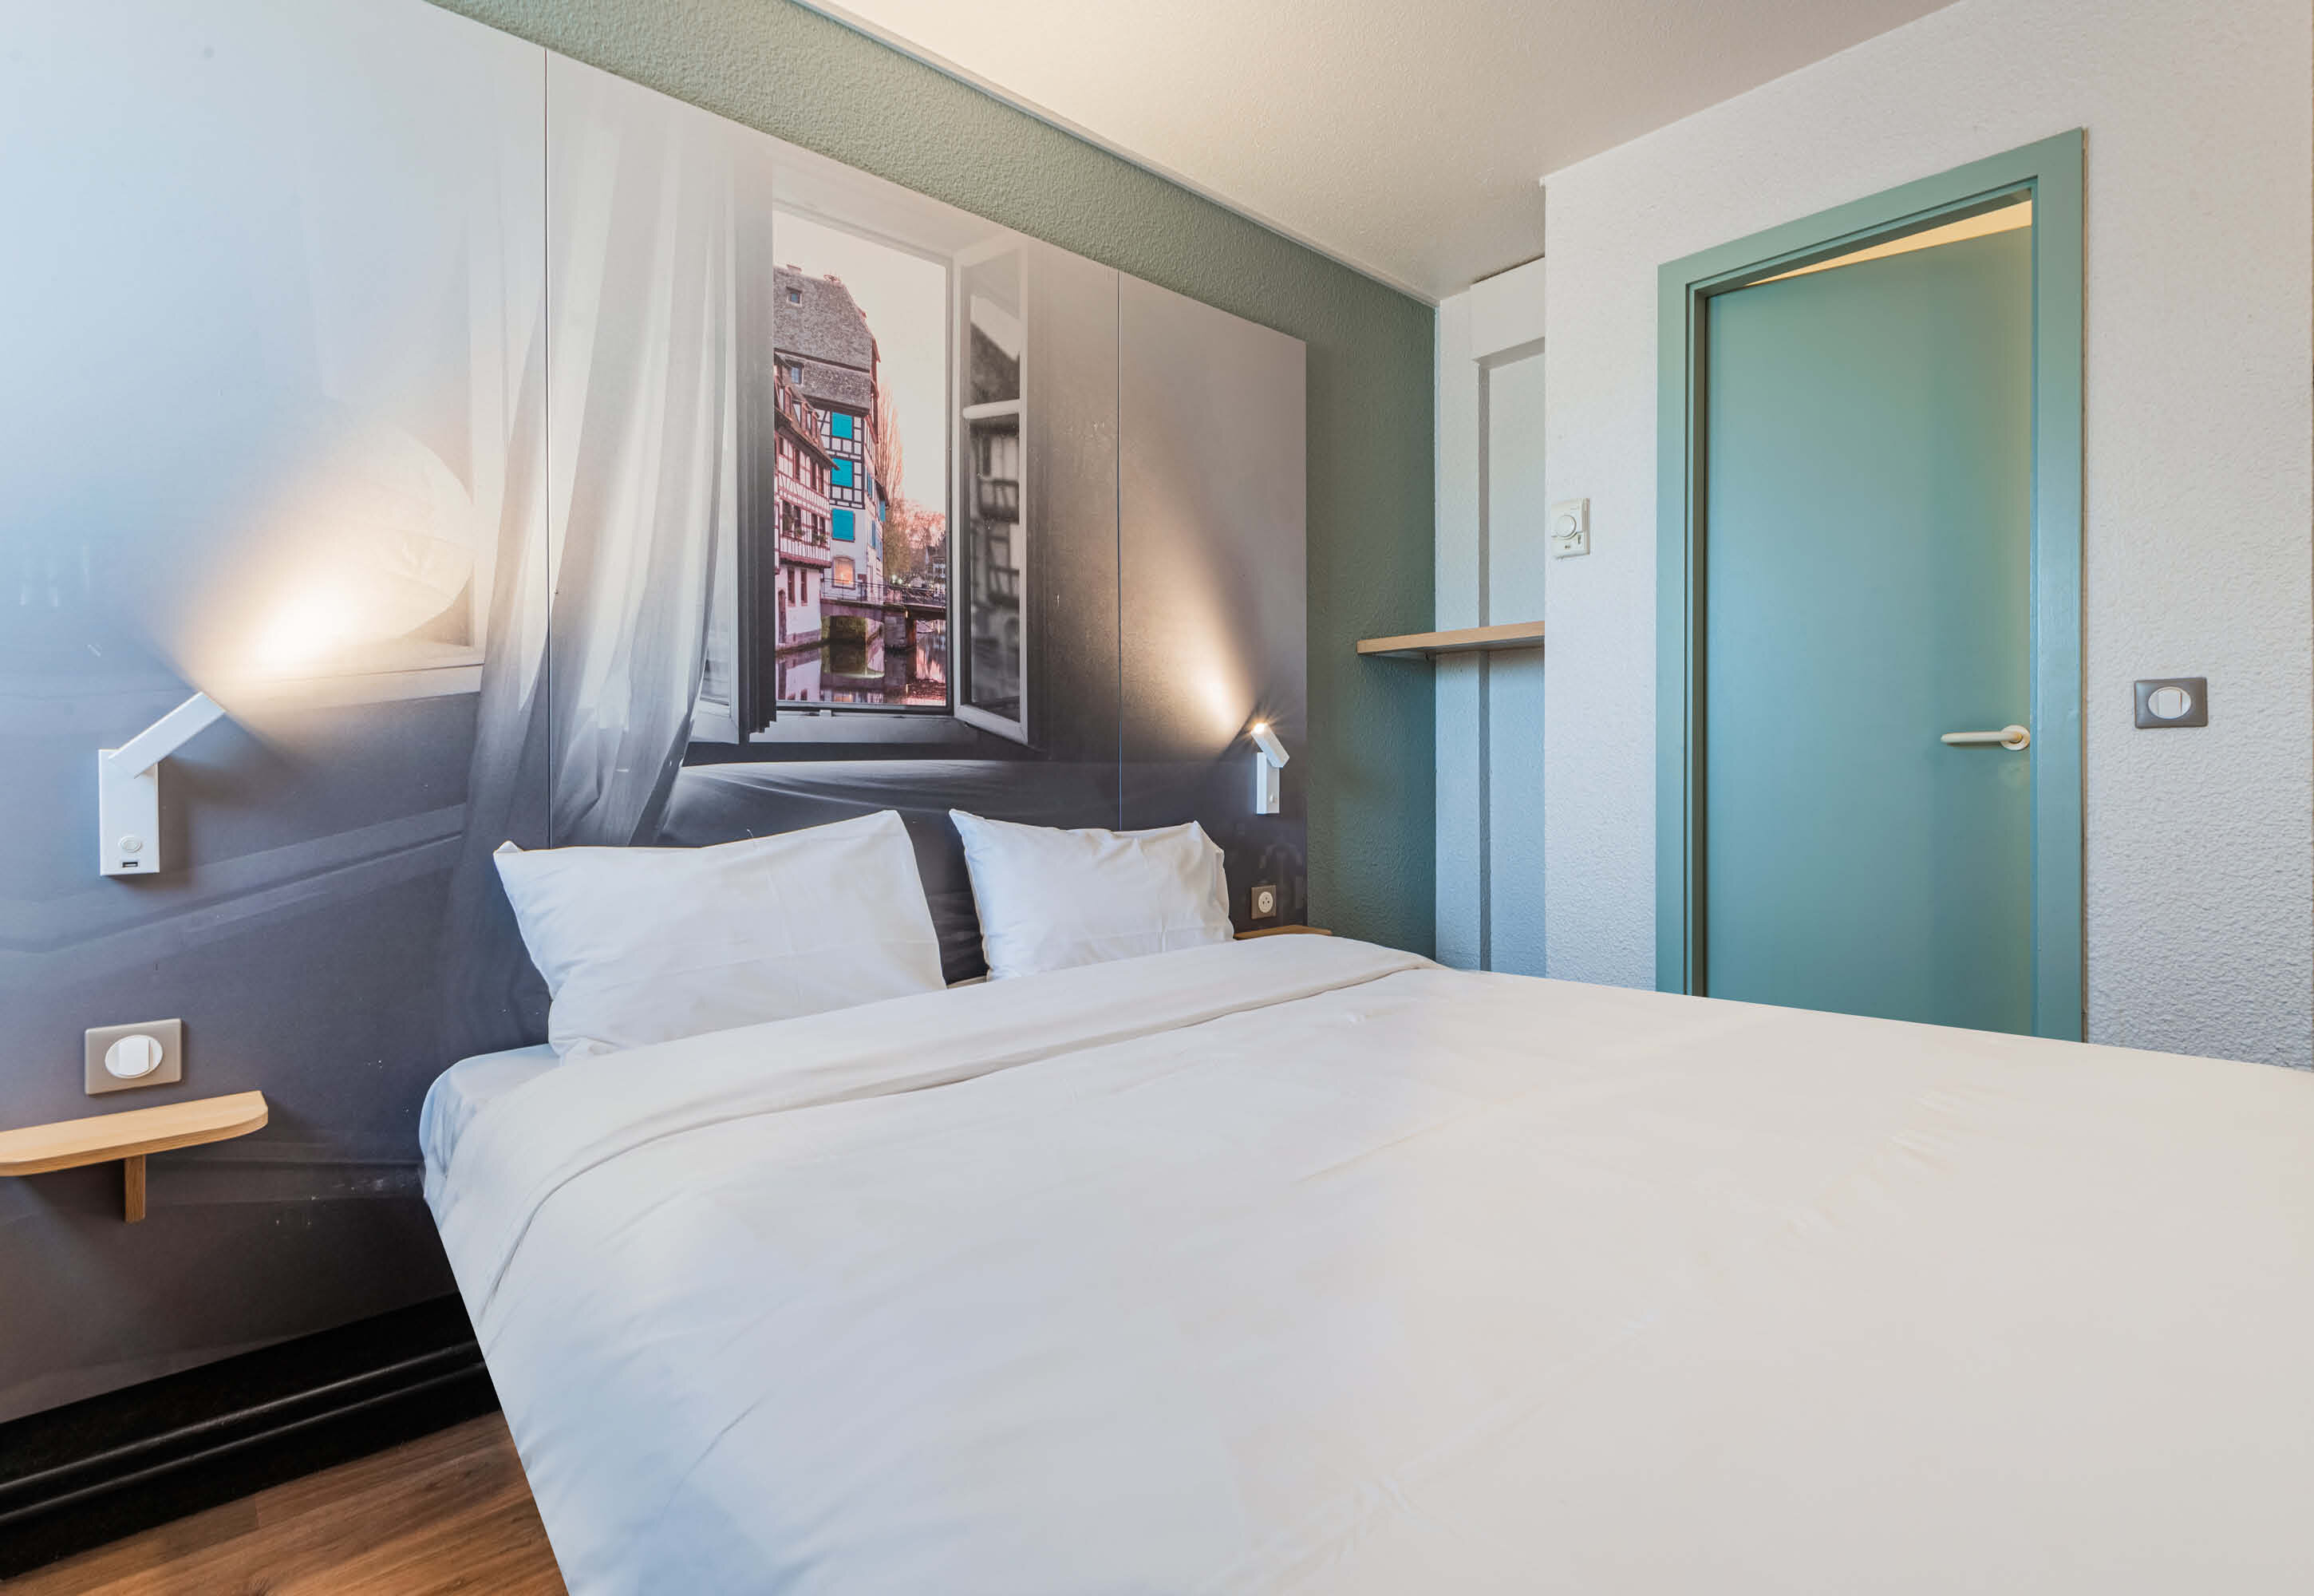 Images B&B HOTEL Strasbourg Nord Industrie